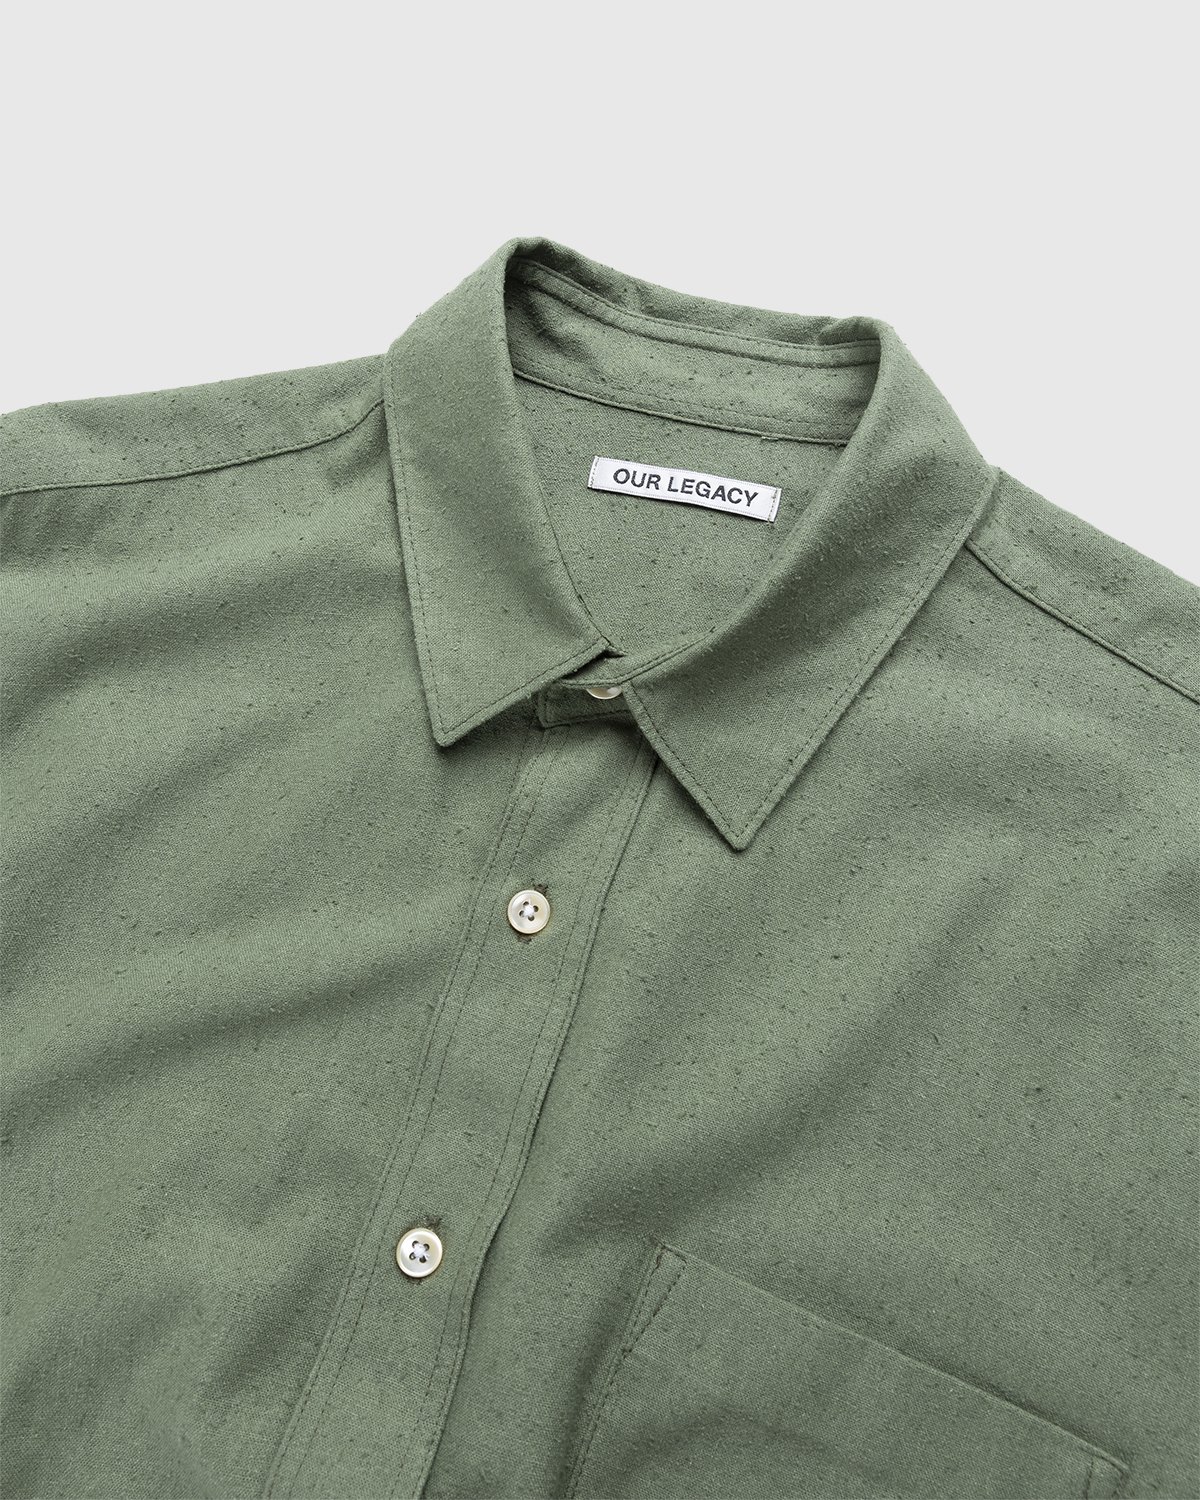 Our Legacy - Classic Shirt Ivy Green - Clothing - Green - Image 6